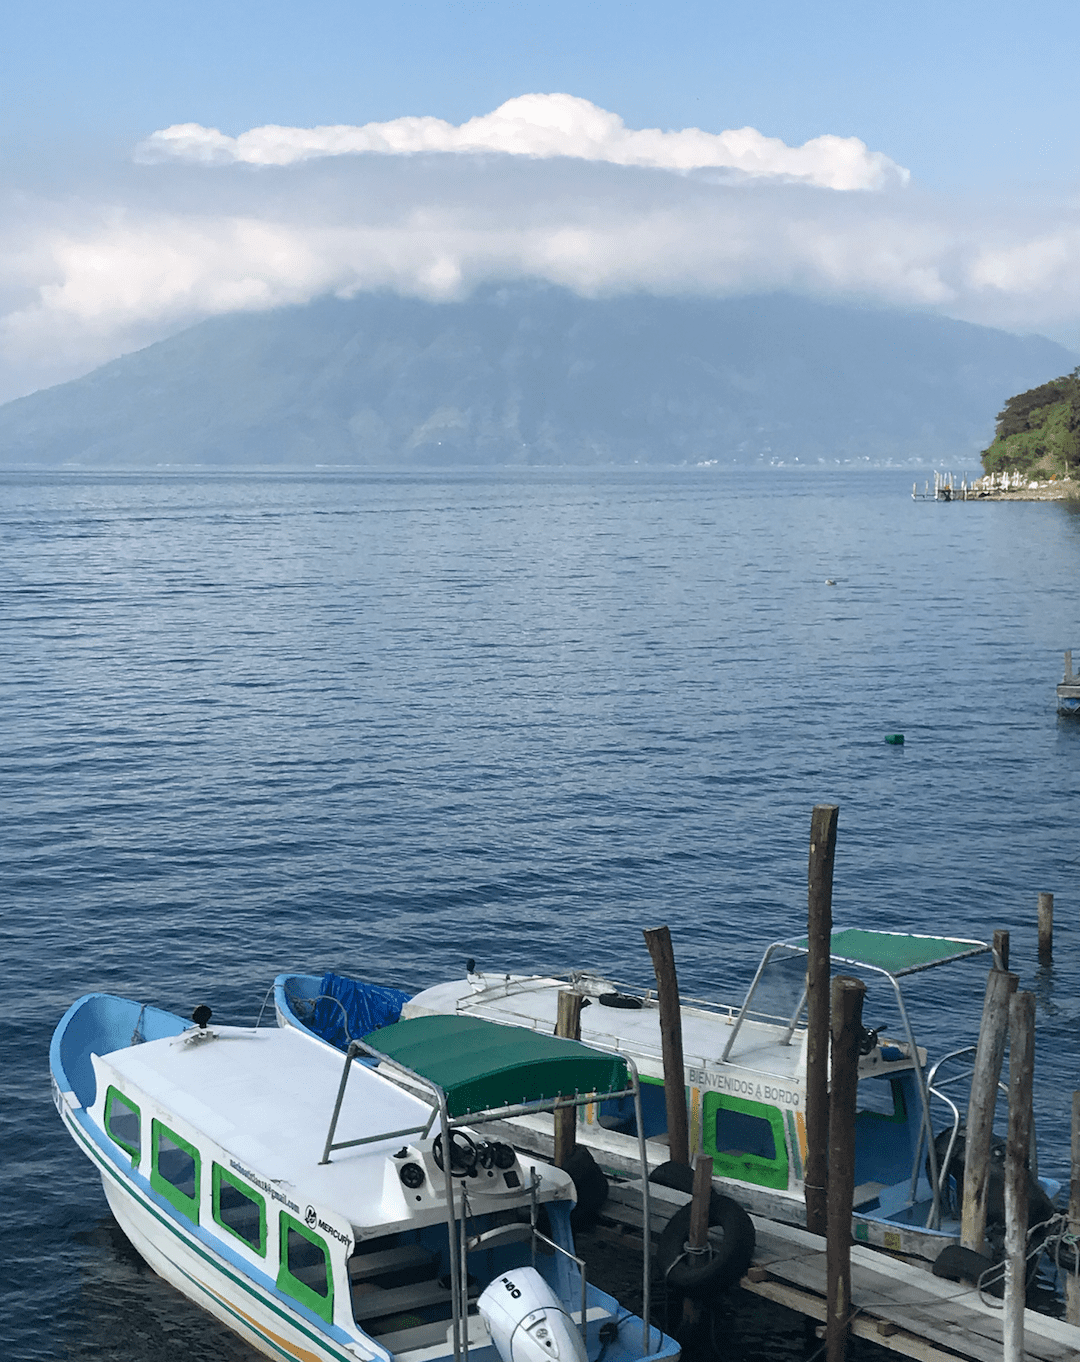 Water taxis or lanchas are the best way to travel around Lake Atitlan.